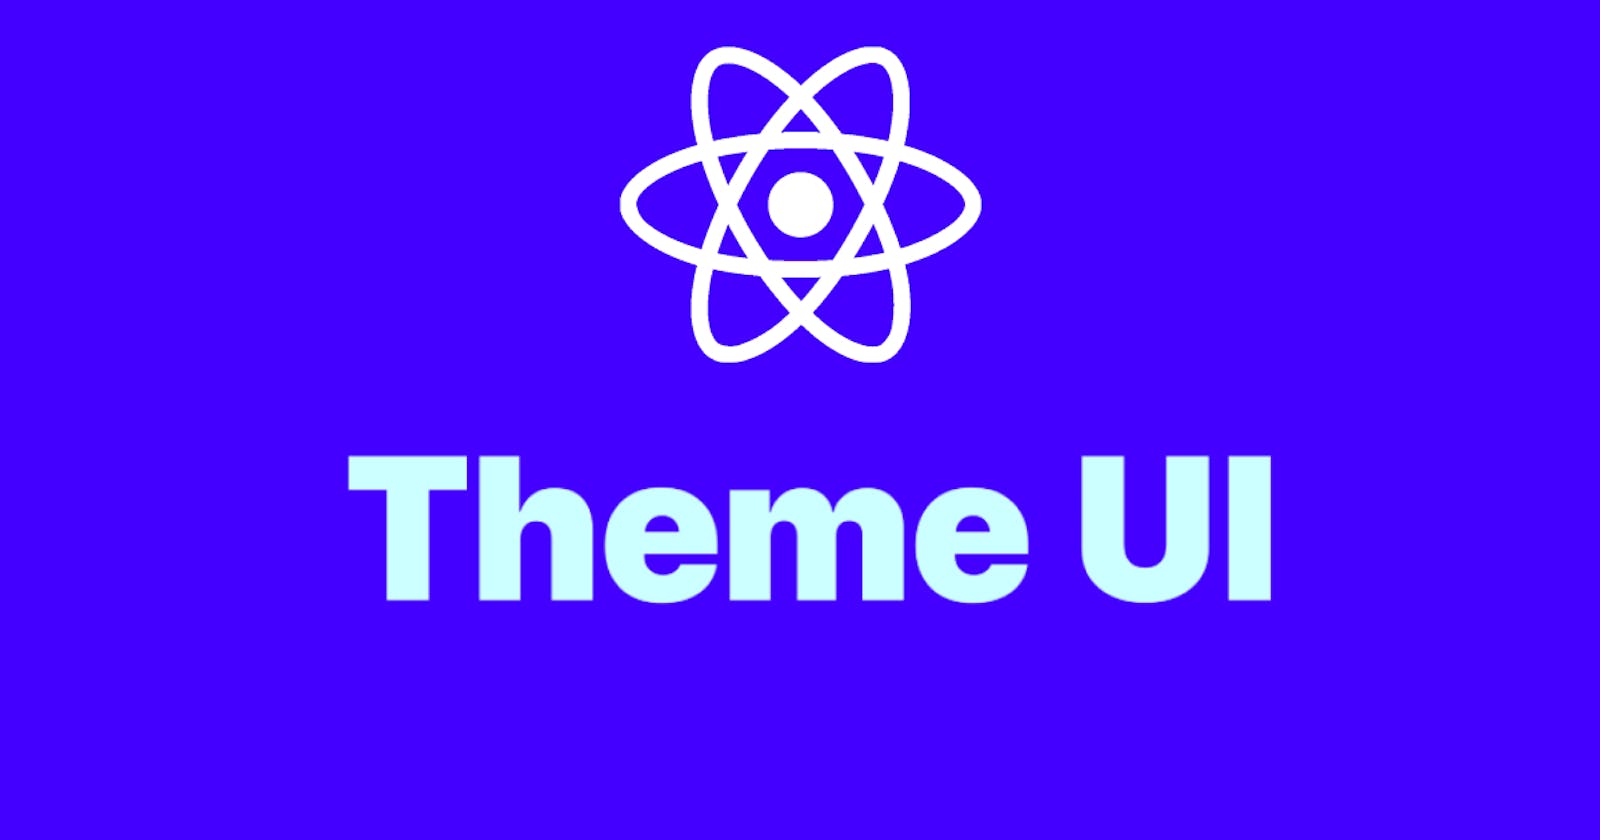 Why You Should Try Theme UI